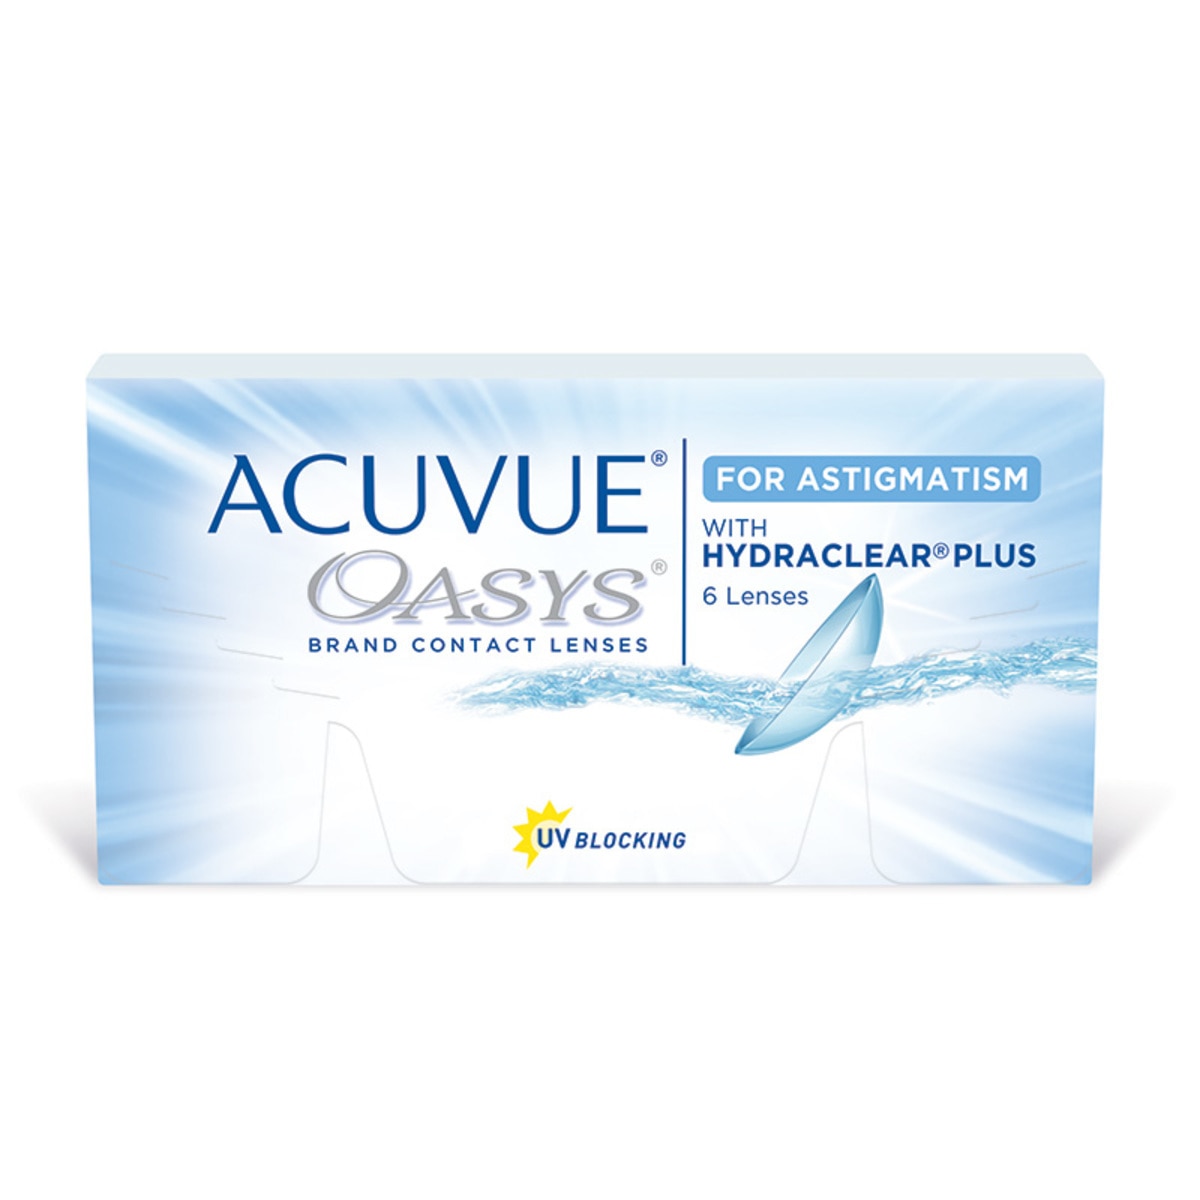 ACUVUE OASYS® con HYDRACLEAR Plus® para Astigmatismo (D -3.25, Cyl/Axis -2.25/80)